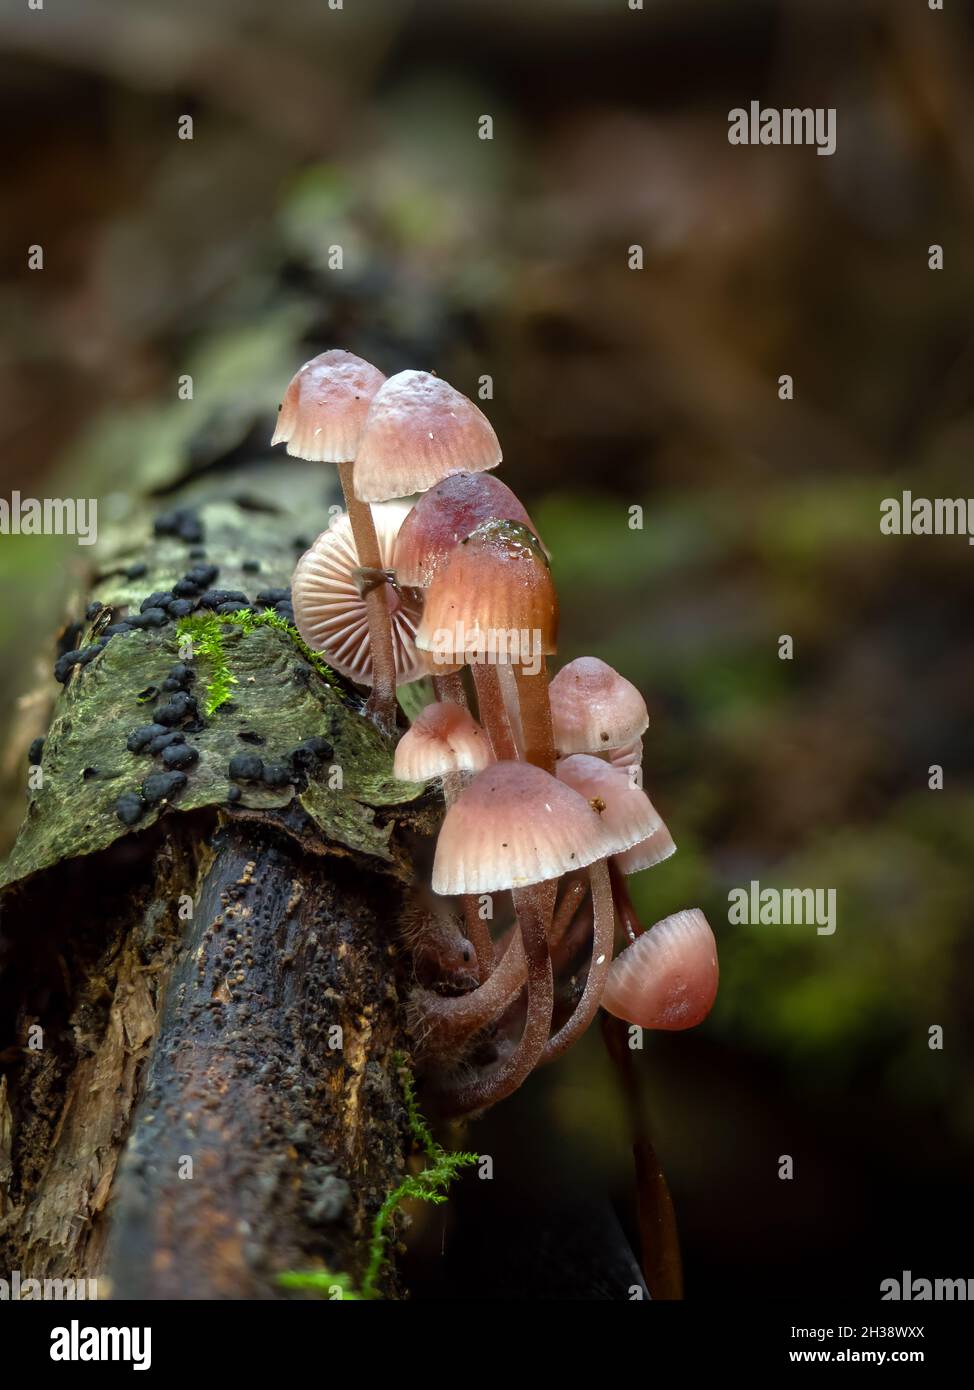 Burgundy-drop Bonnet fungi growing on dead wood in East Sussex woodland. Stock Photo